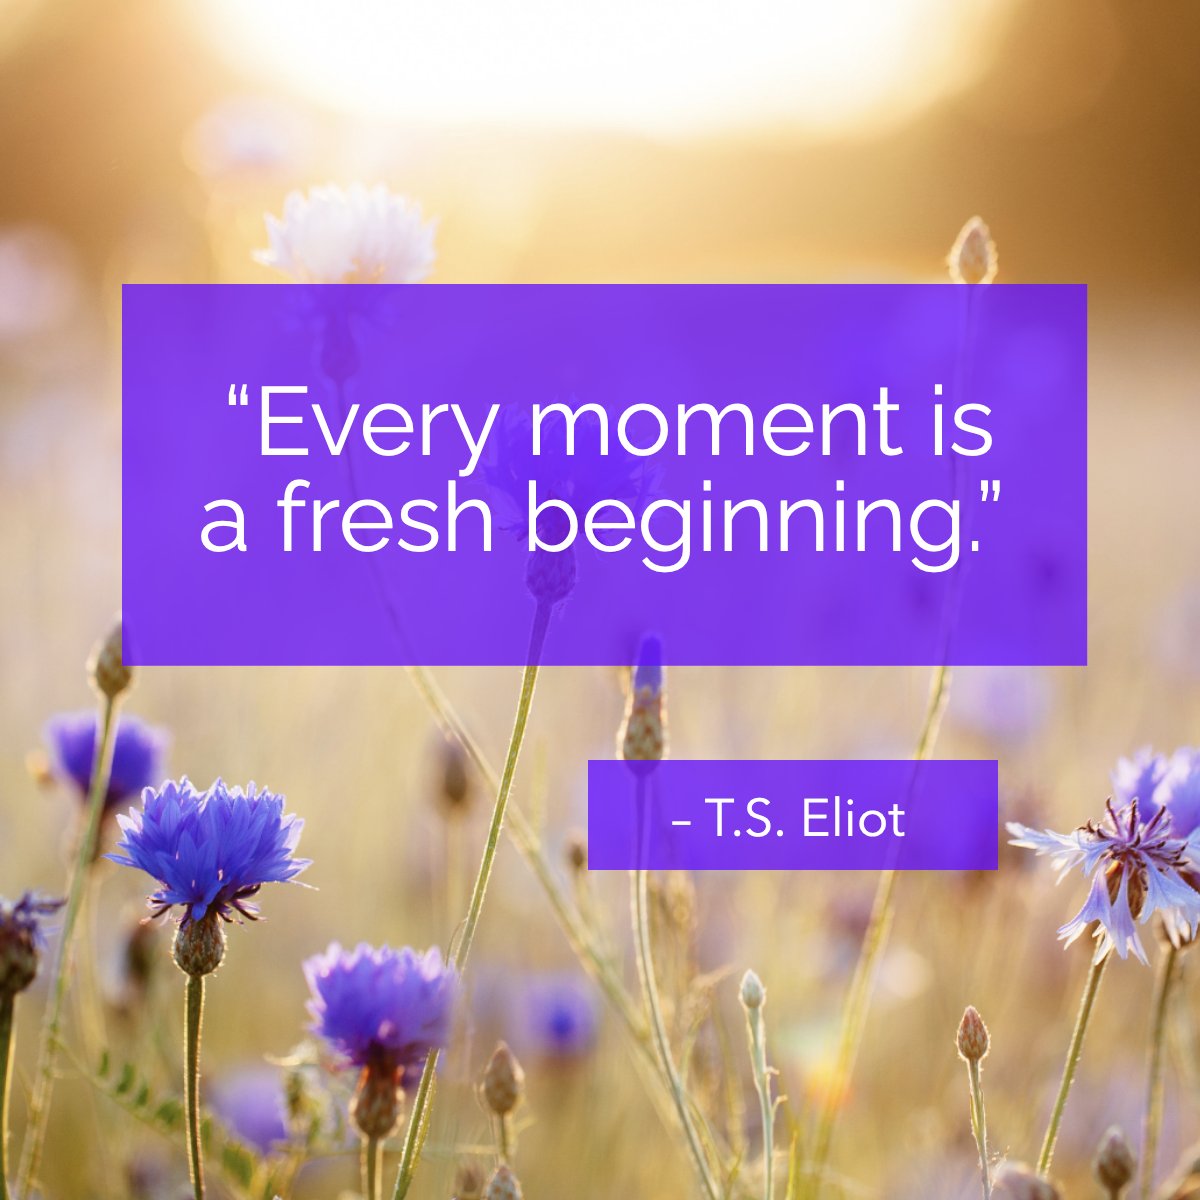 Thomas Stearns Eliot OM was a poet, essayist, publisher, playwright, literary critic, and editor.

Considered one of the 20th century's major poets 

#tseliot #beginnings #inspiring #inspirational #quote
 #YourPerfectHome #CRayBrower #SanJoaquinCounty #StocktonCA